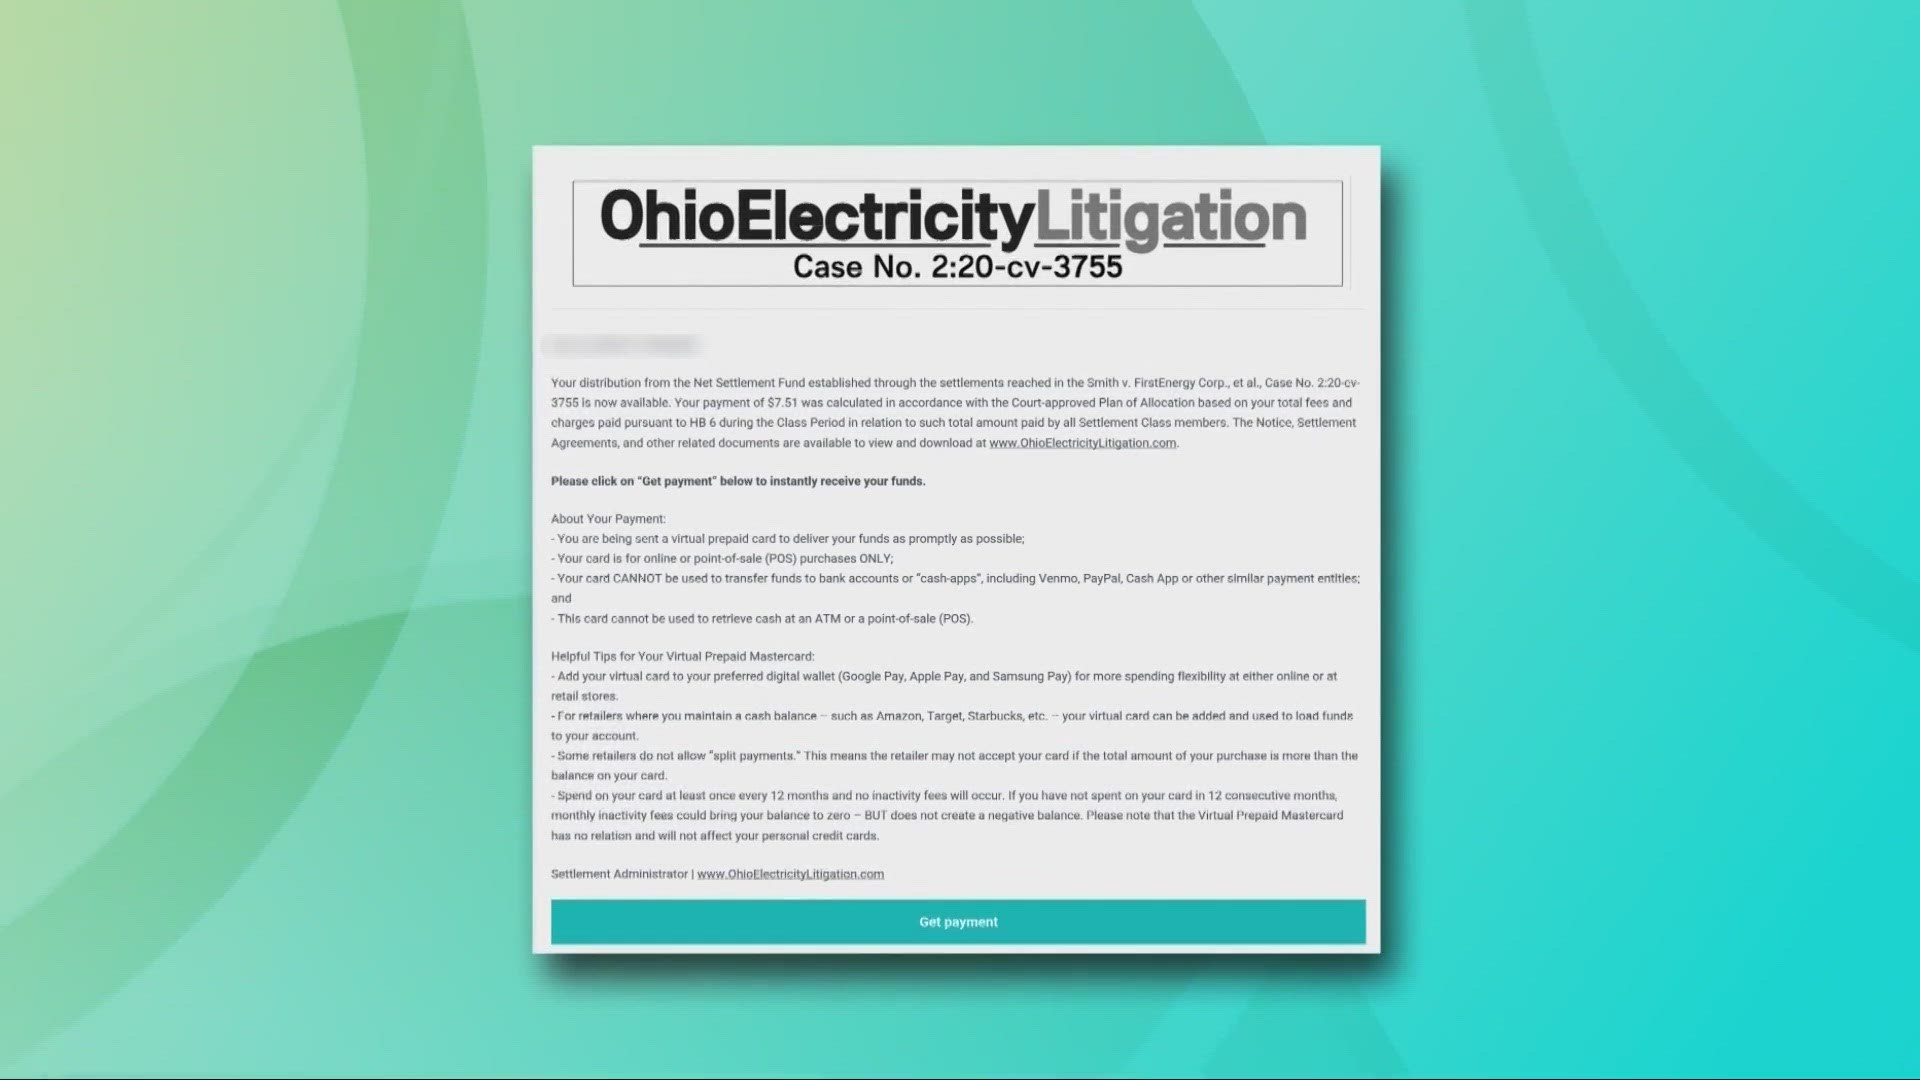 The BBB says these recent mailings 'are a rare example of a legitimate utility-related solicitation.'